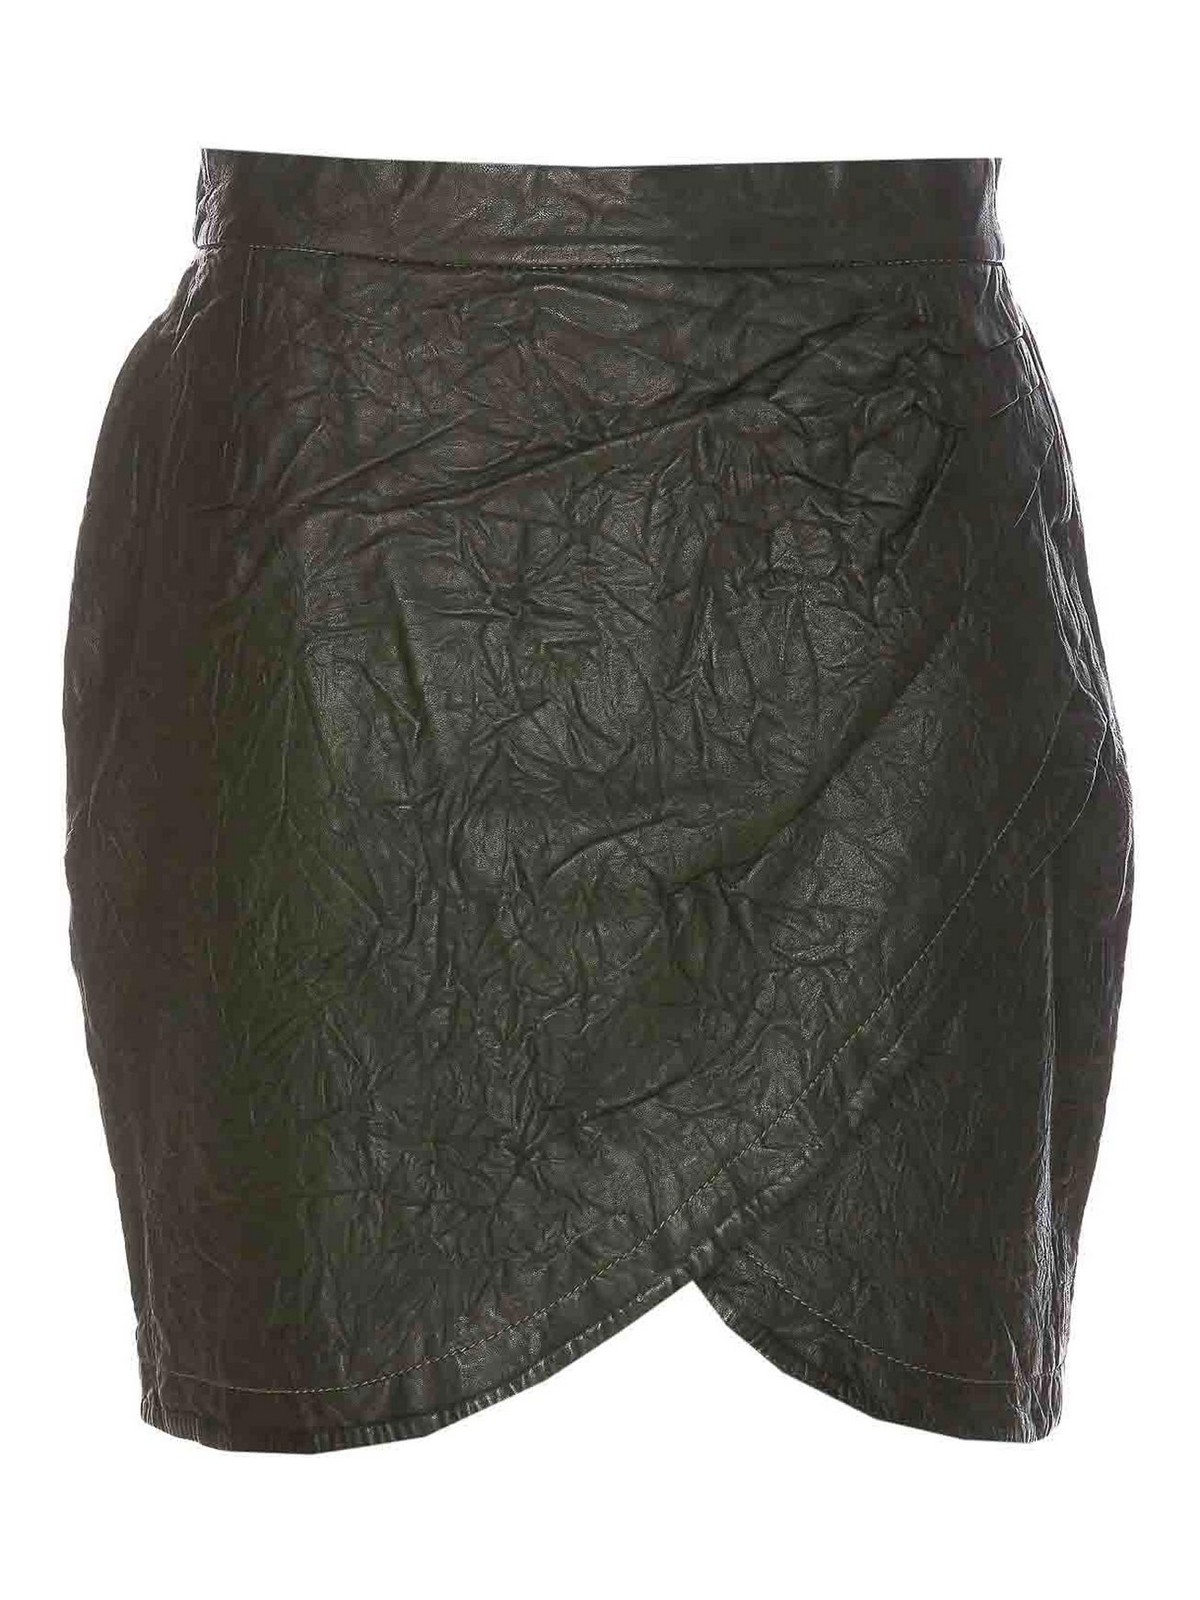 Zadig & Voltaire Wrapped Leather Miniskirt In Light Brown